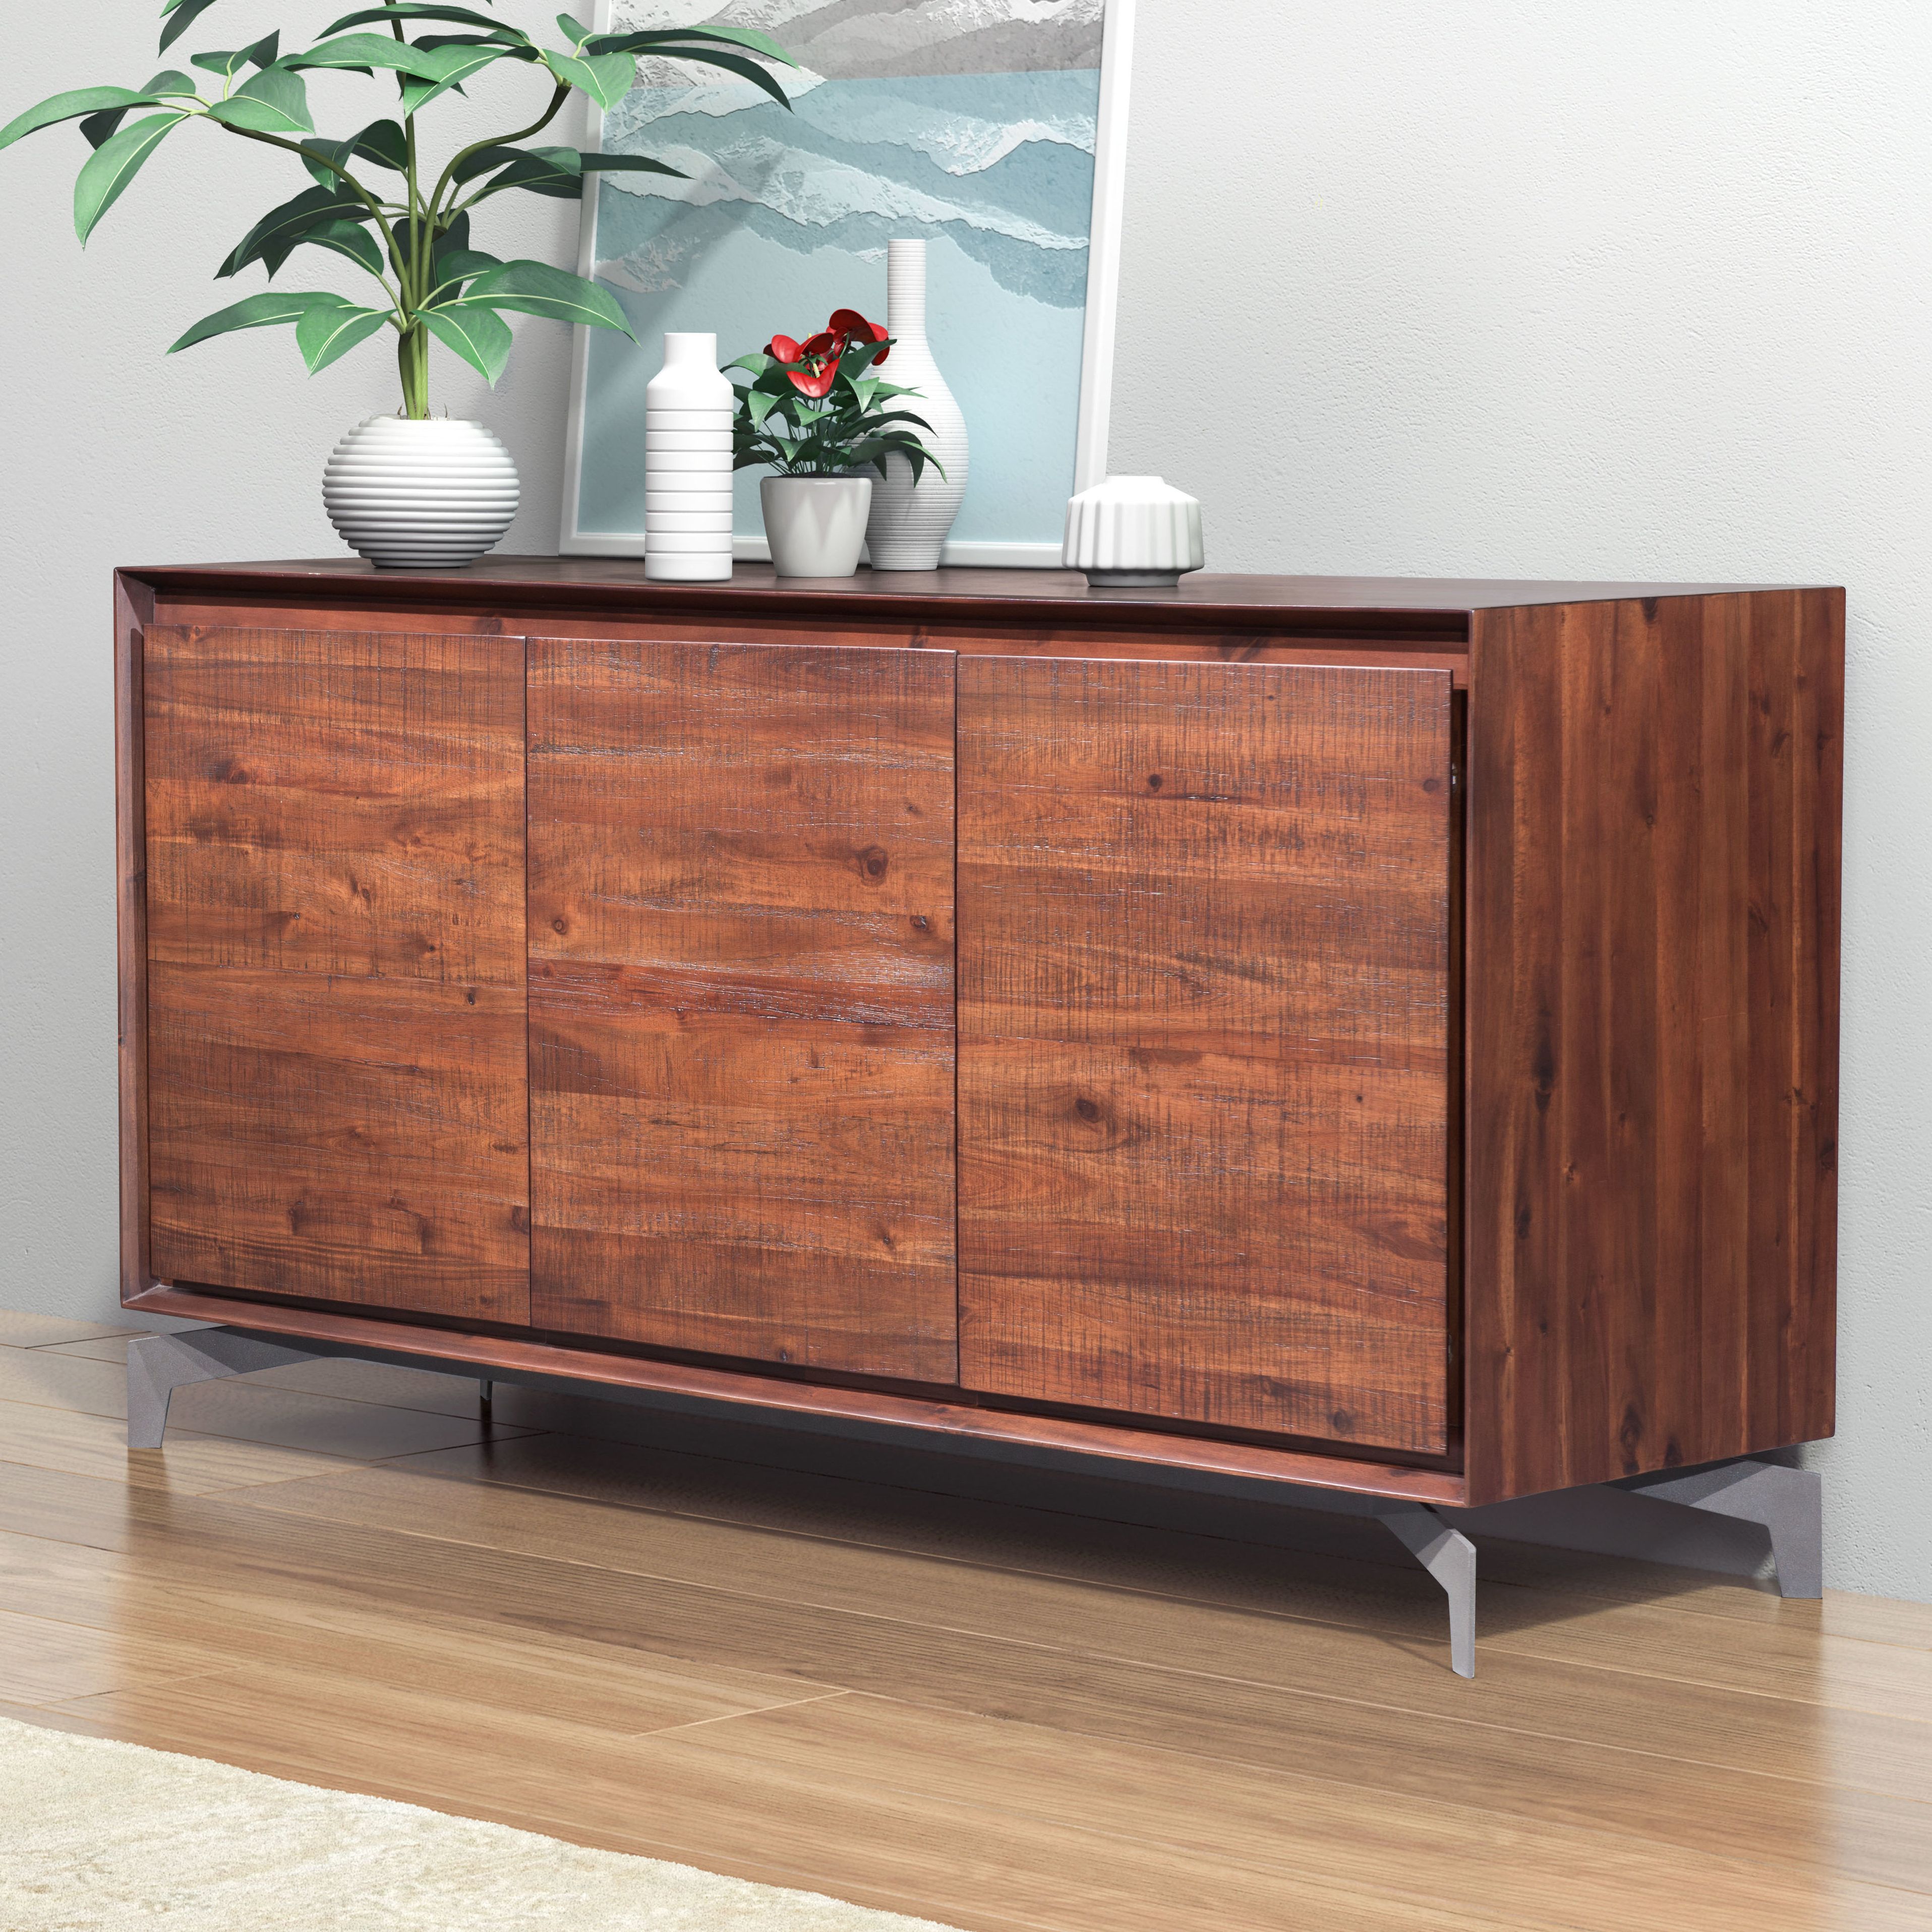 Riggleman Sideboard | Joss & Main Intended For Remington Sideboards (View 7 of 20)